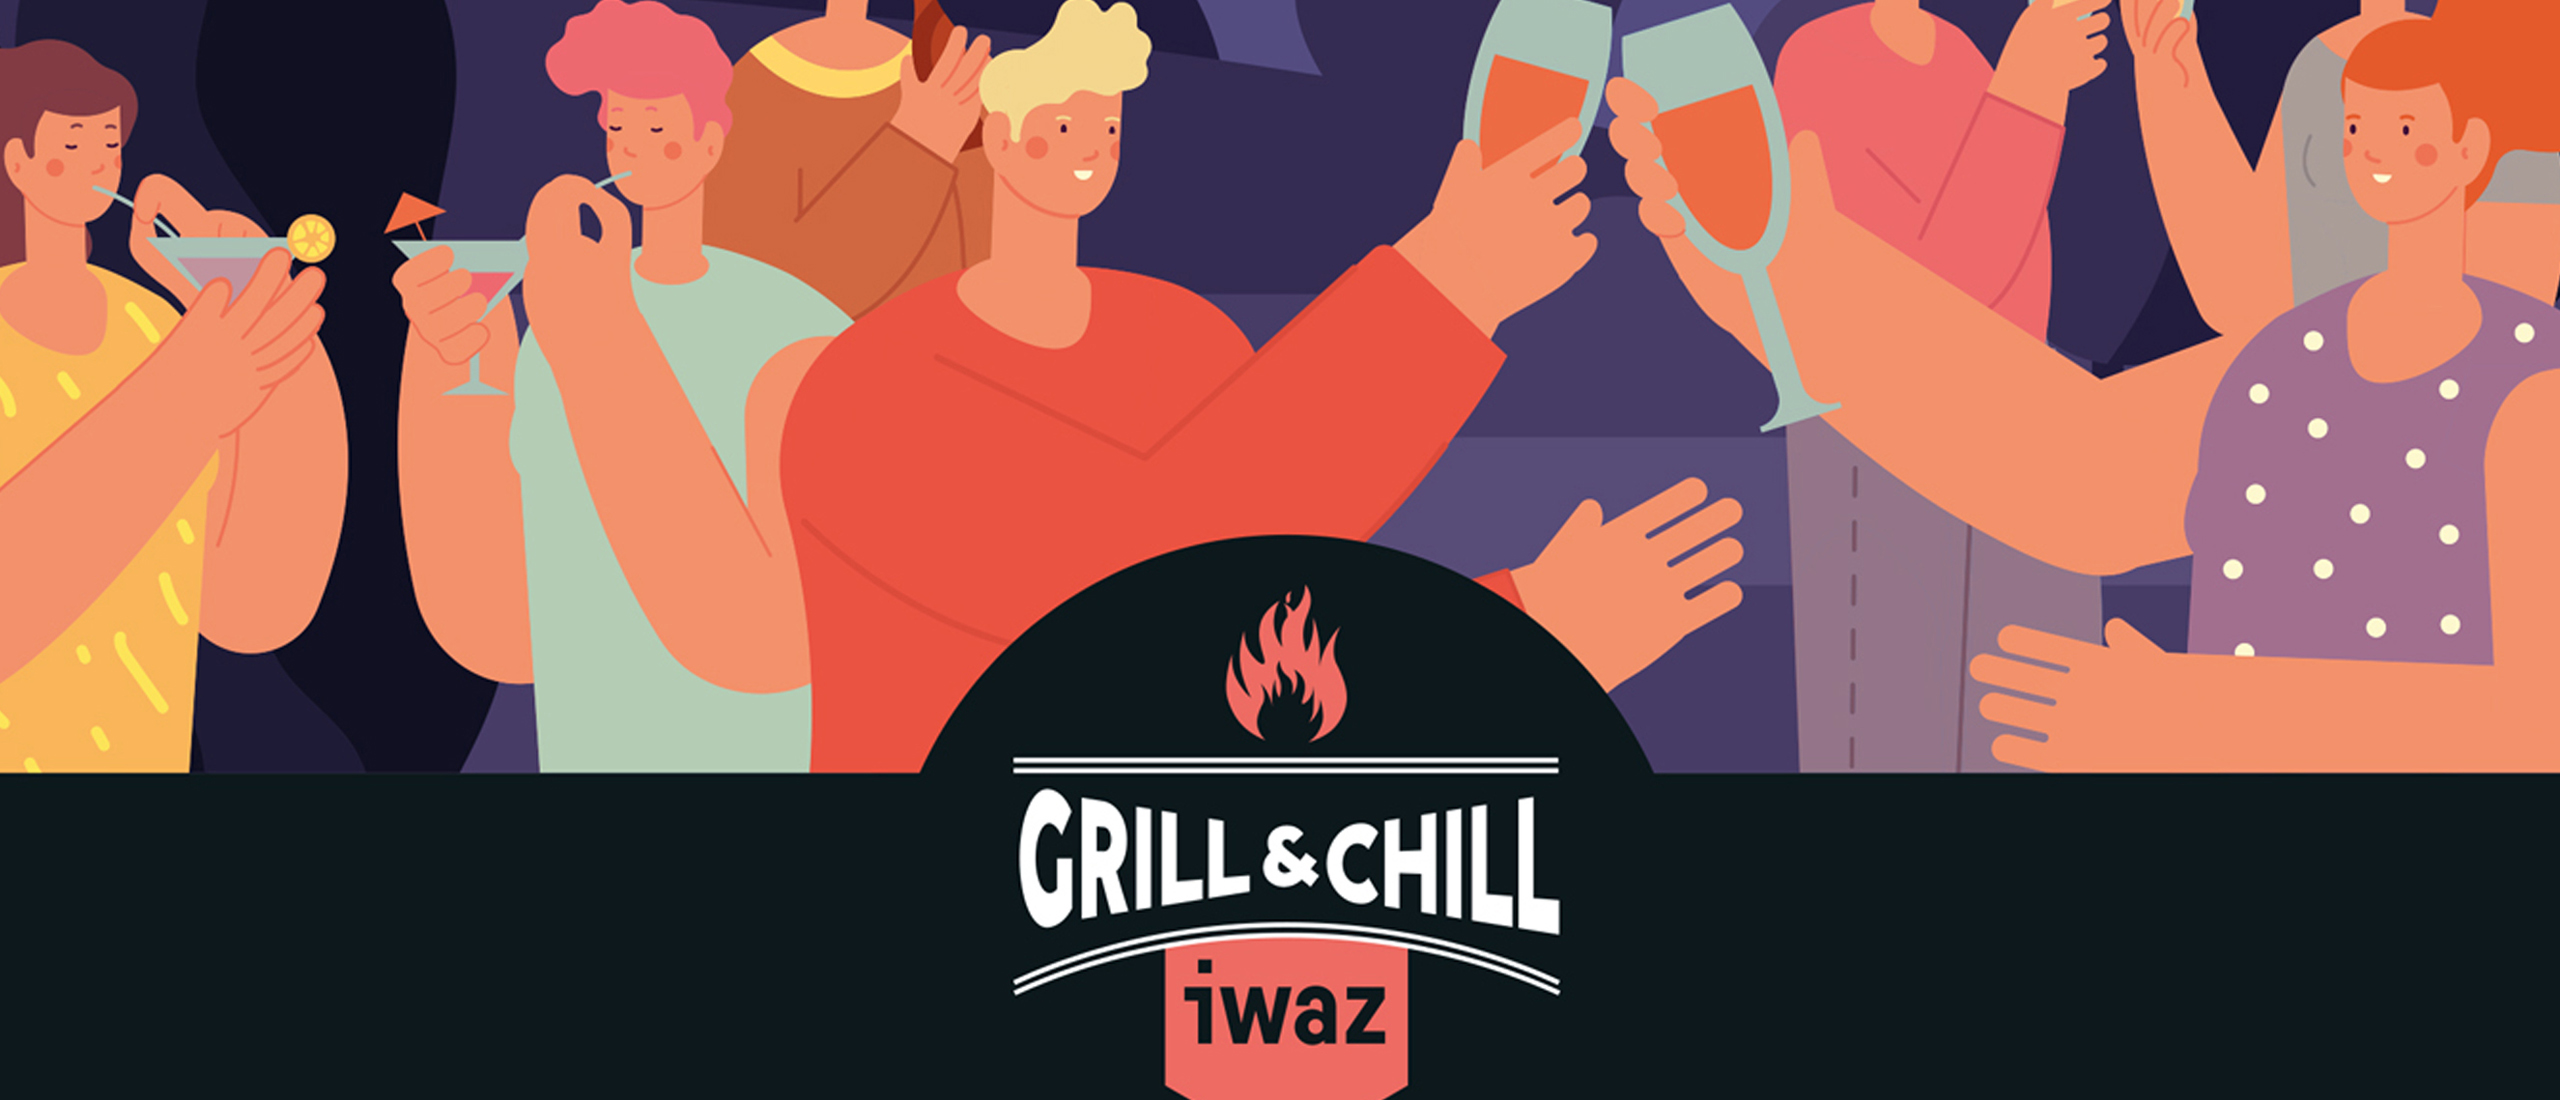 iwaz-News-Events-Grill-and-Chill-